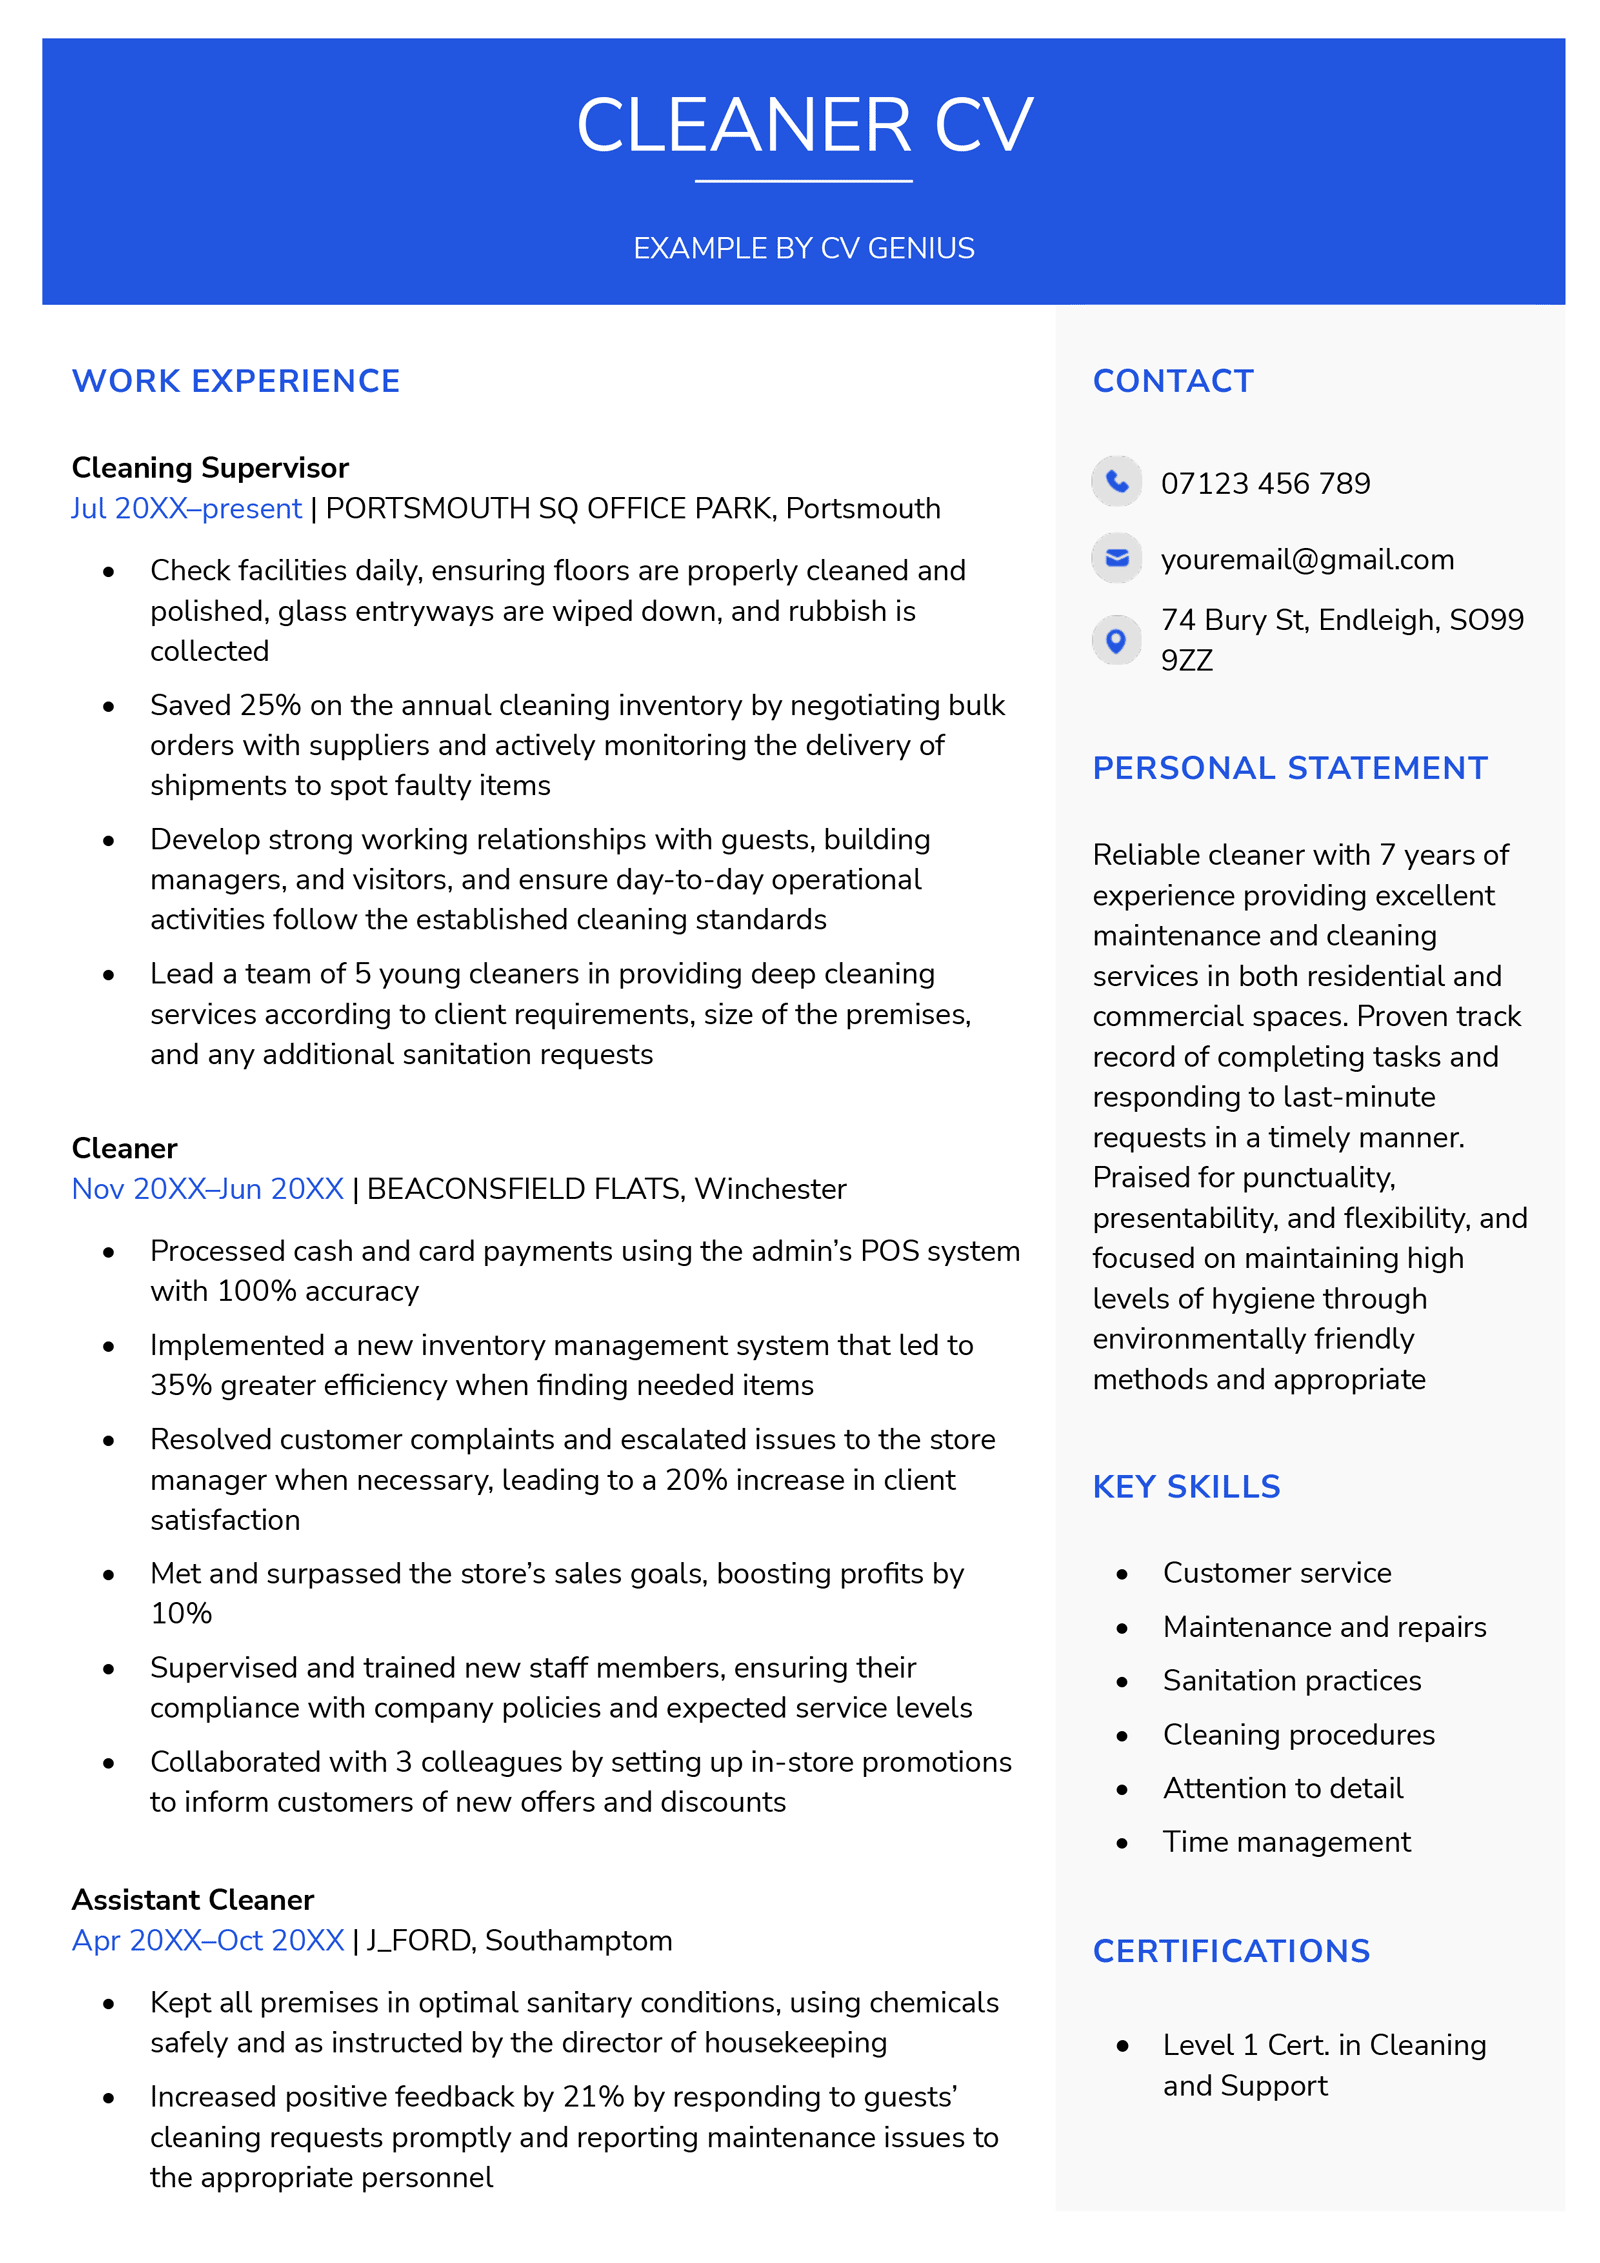 Cleaner CV - Example, Free Template, & How to Write